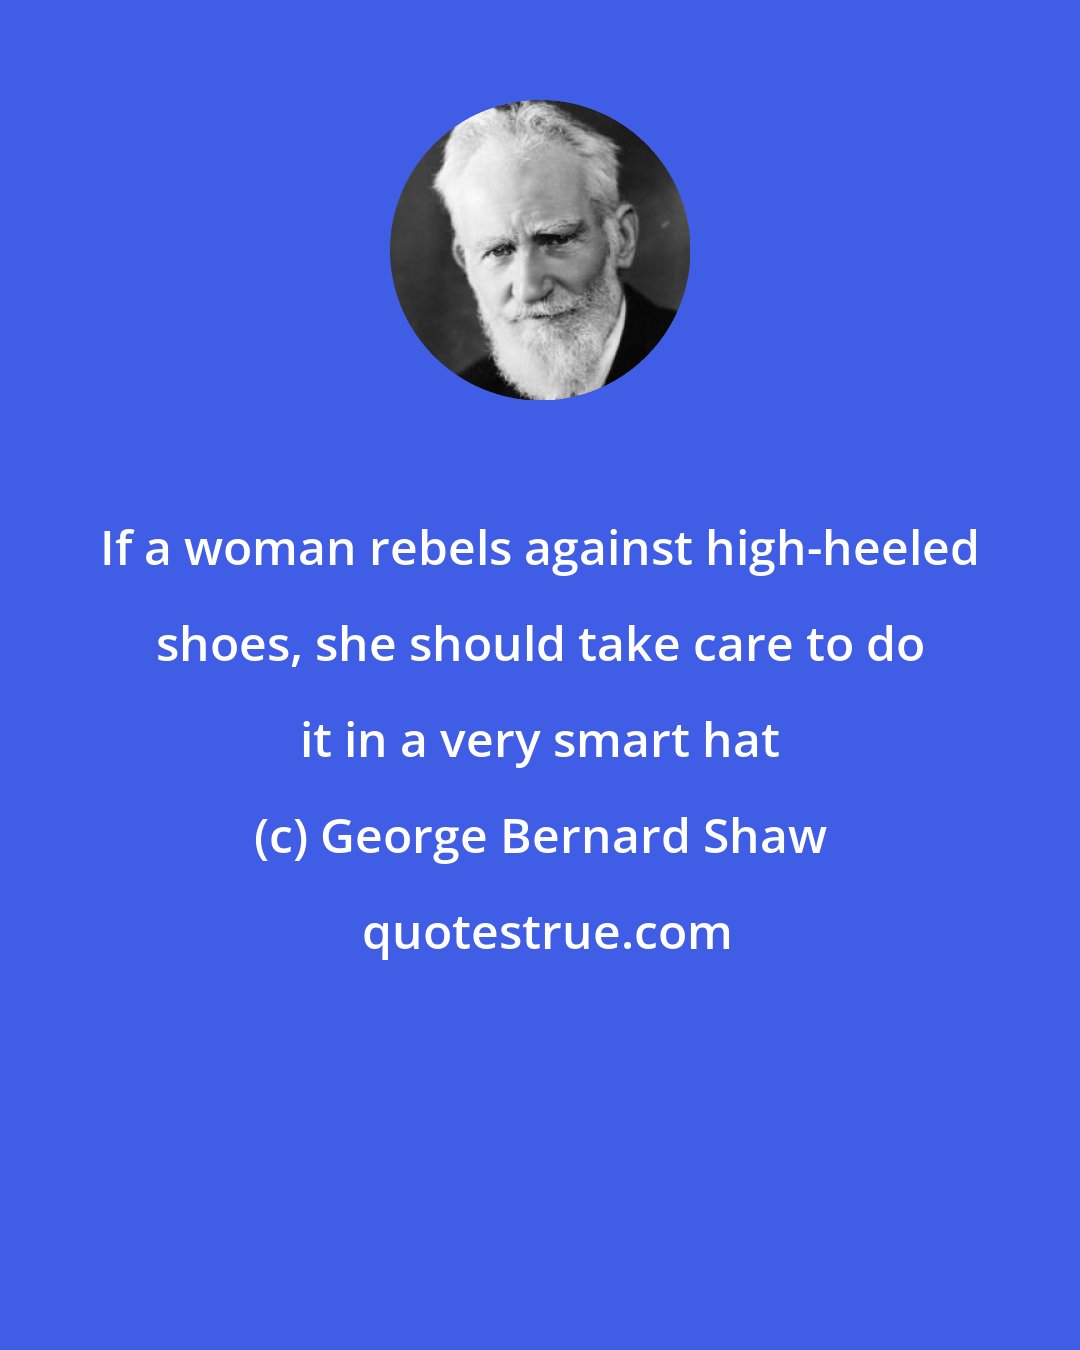 George Bernard Shaw: If a woman rebels against high-heeled shoes, she should take care to do it in a very smart hat